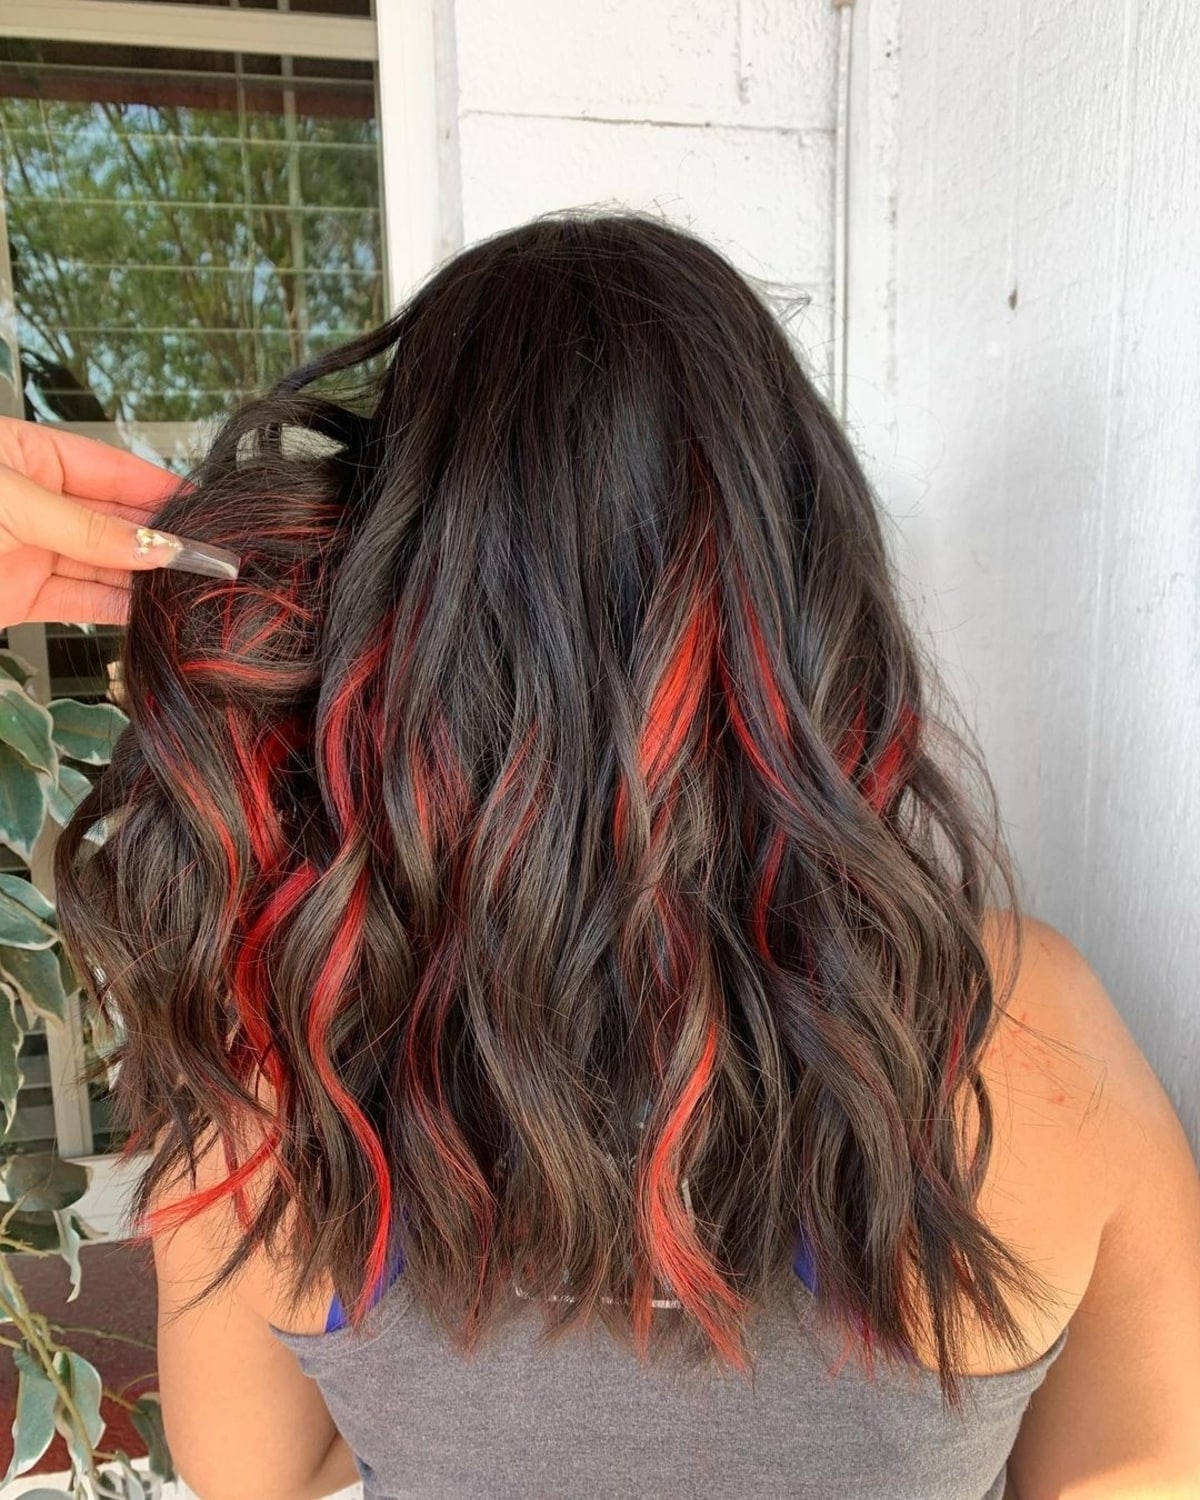 Black hair with red highlights underneath